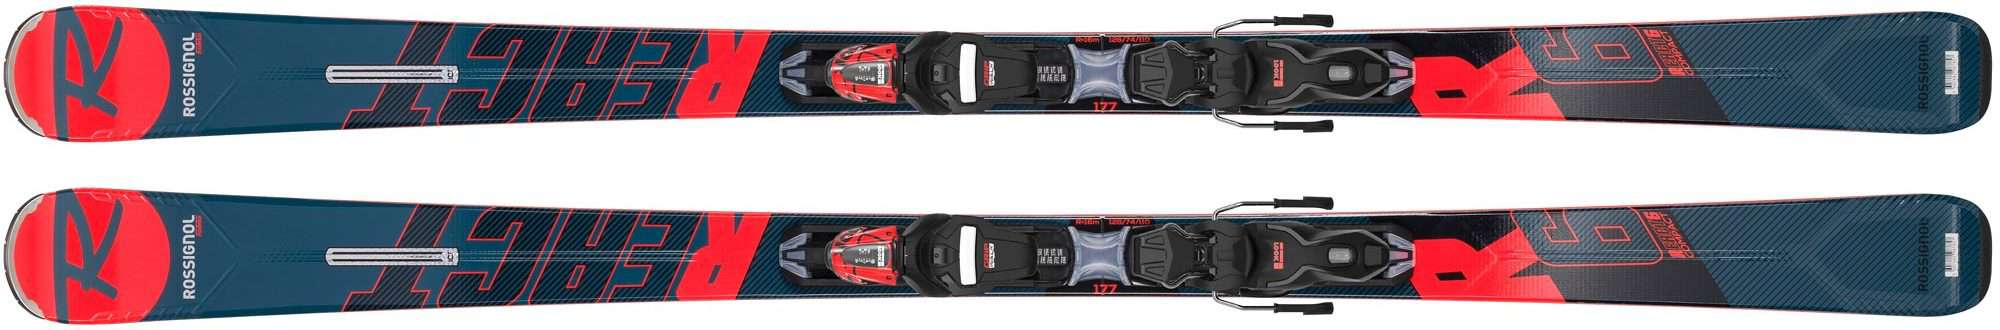 Rossignol R6 Compact